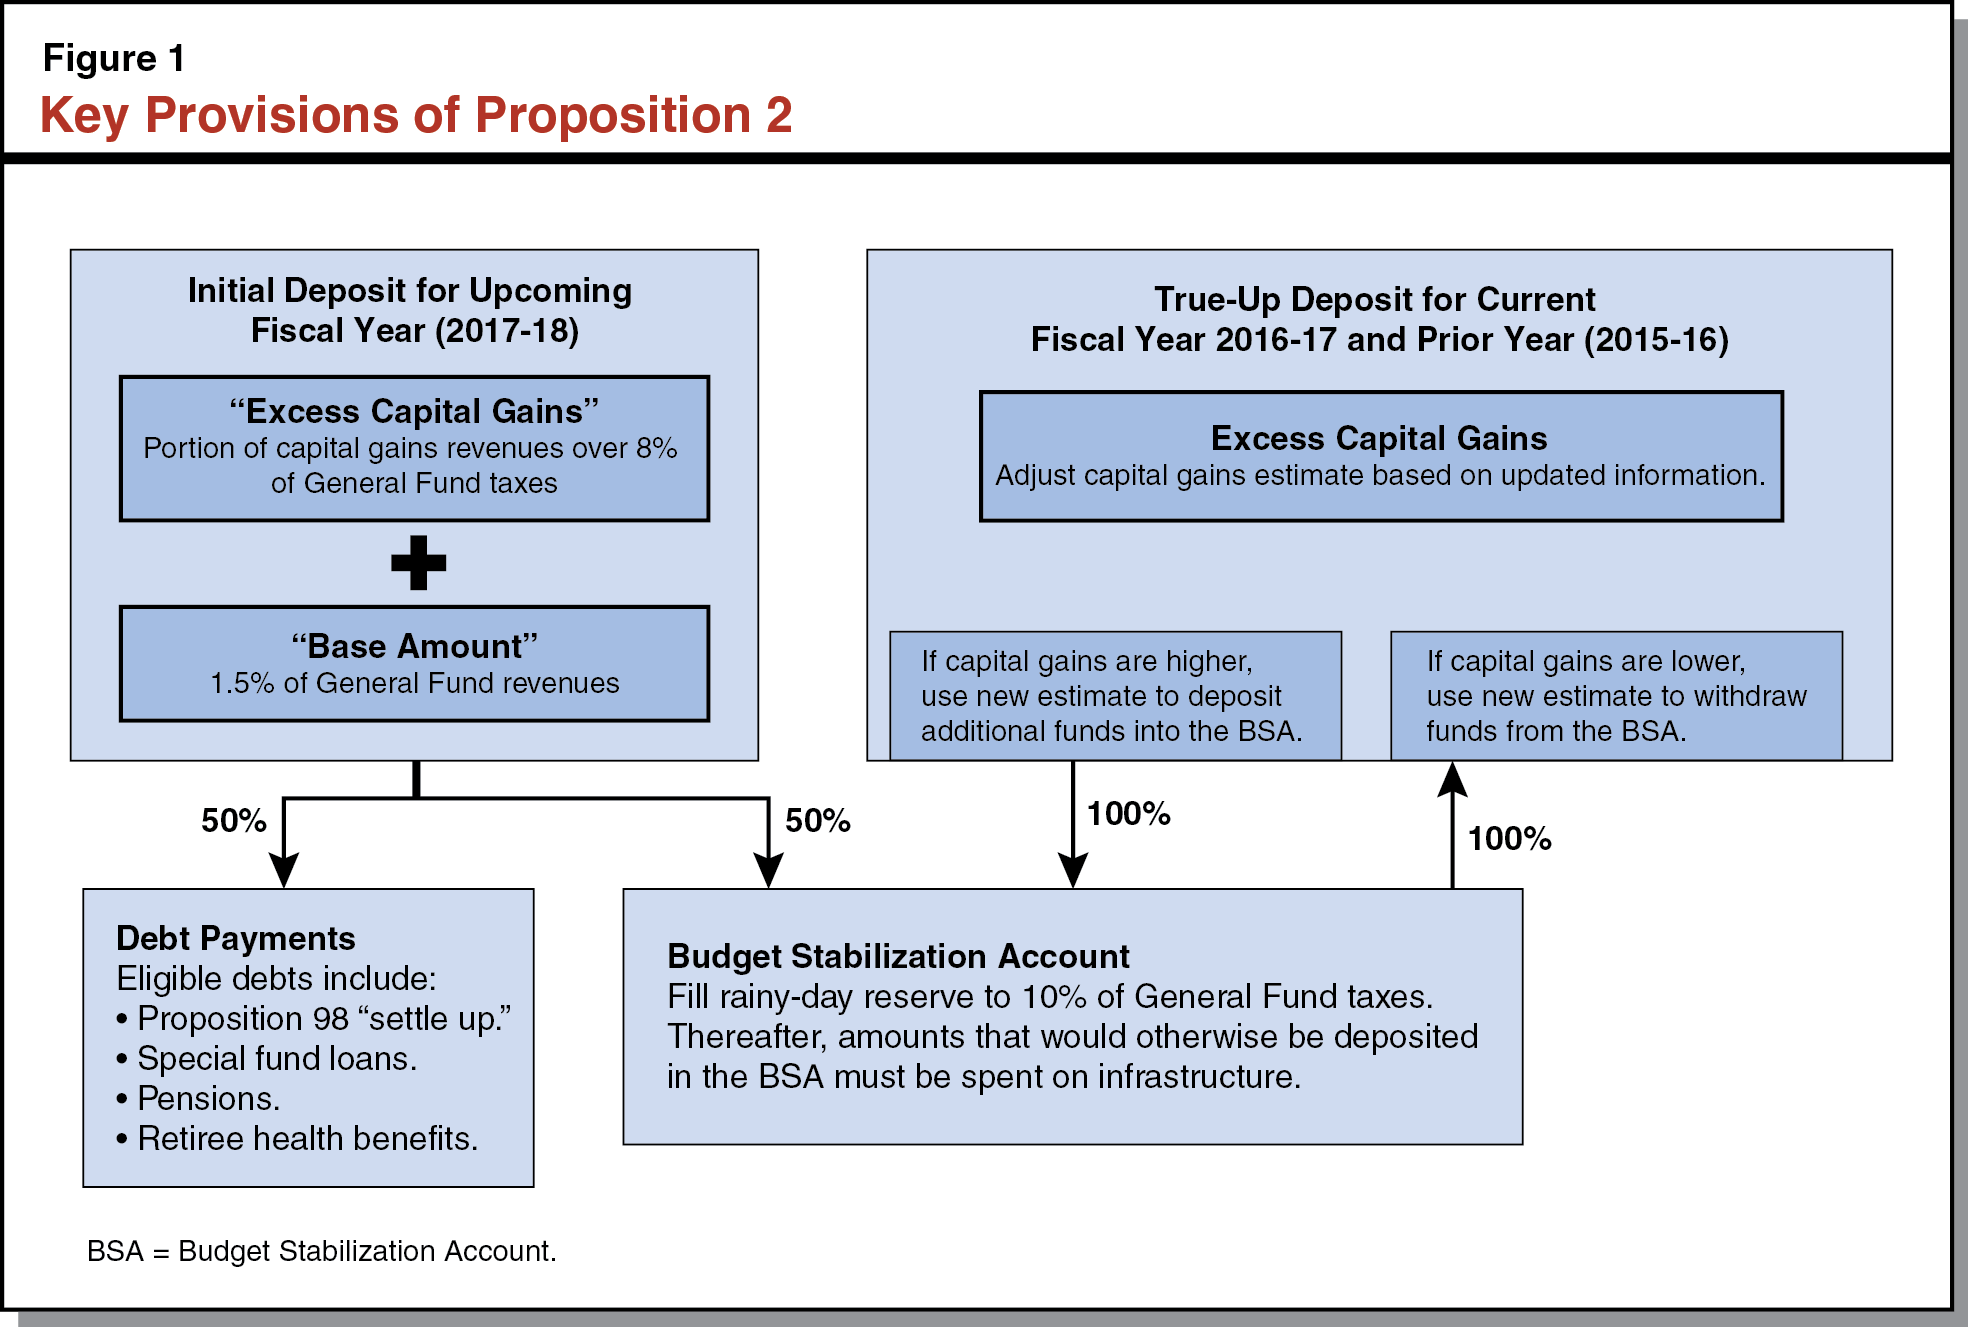 Figure 1: Key Provisions of Proposition 2